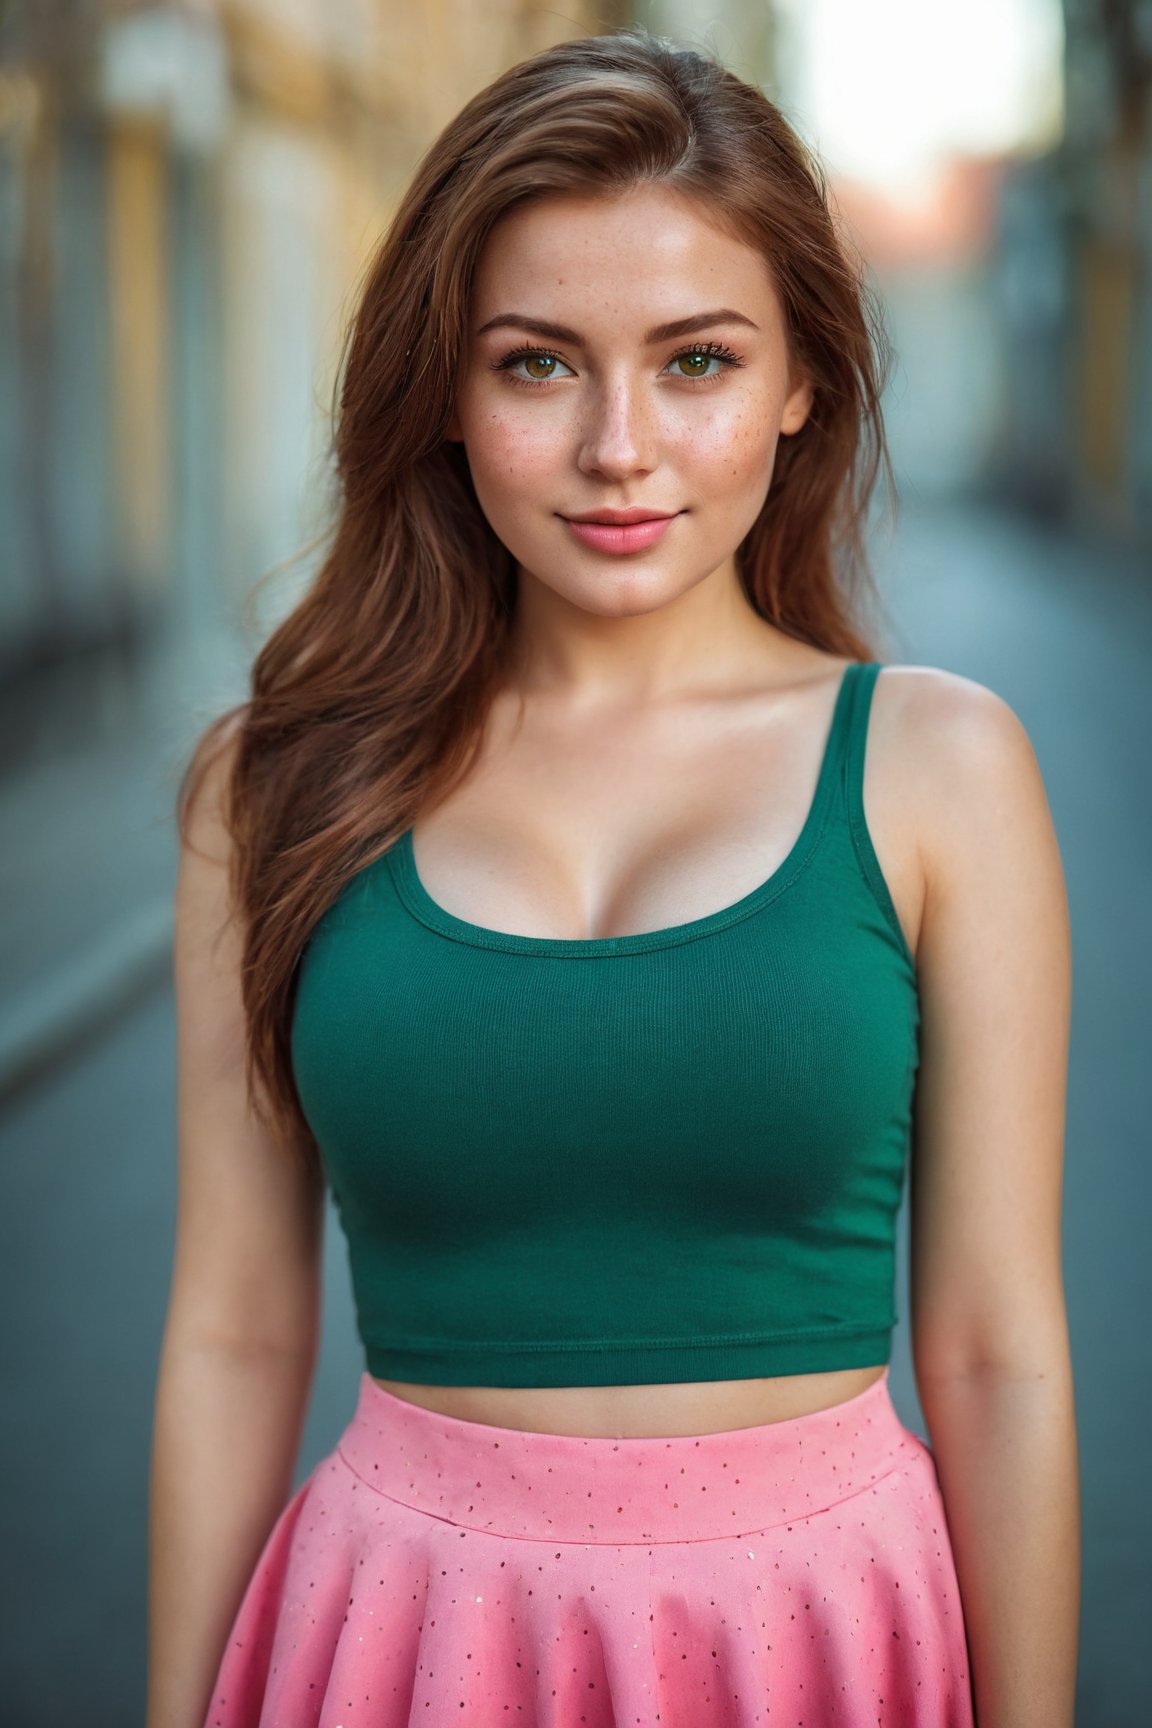 ((27-year-old Russian girl)) with a gorgeous and cute appearance. Capture her with a ((smirk)) and highlighting her ((freckles)). She should be wearing a ((green top and pink skirt)). In the background, include a young girl in a green top and pink skirt for context. This should be a ((masterpiece)) with a ((best_quality)) in ultra-high resolution, both ((4K)) and ((8K)), incorporating ((HDR)) for added vibrancy. Utilize a ((Kodak Portra 400 lens)) to achieve a professional and timeless quality. Emphasize a ((blurry background)) with a touch of ((bokeh)) and ((lens flare)) for artistic effect. Enhance ((vibrant colors)) for a lively appearance. Ensure the photograph is ((ultra-detailed)) and showcases ((absurdres)) details. Pay extra attention to capturing the ((beautiful face)) of the subject, focusing on features such as ((large breasts)) and a ((narrow waist)). Highlight any ((tattoos)) present. The goal is to create a ((professional photograph)) that is both visually striking and technically superb.